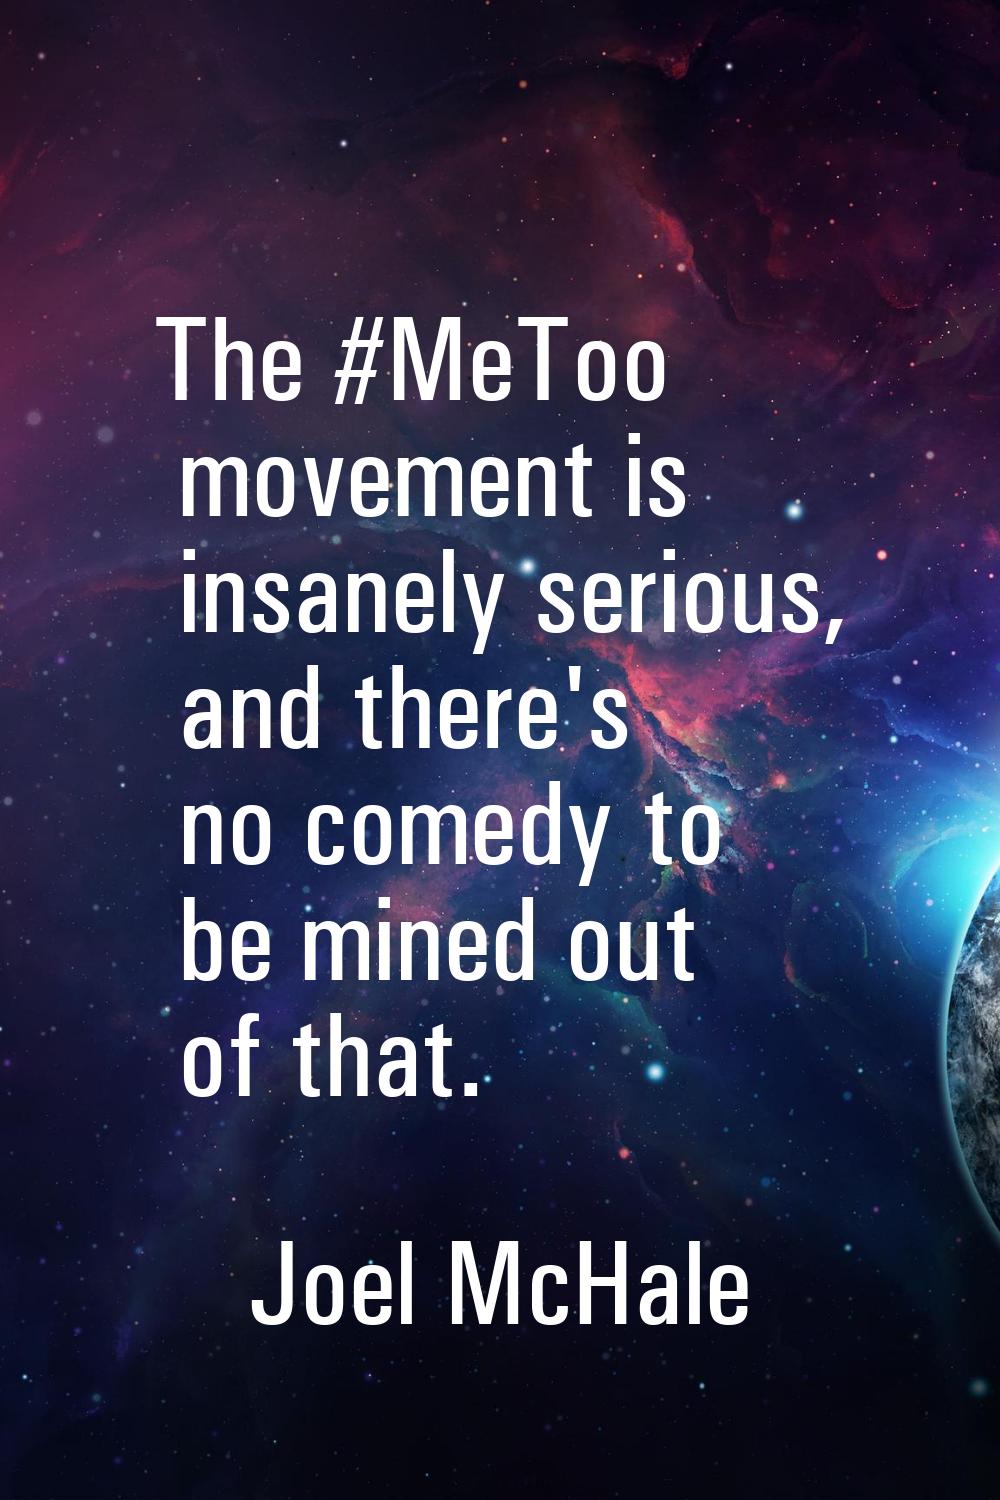 The #MeToo movement is insanely serious, and there's no comedy to be mined out of that.